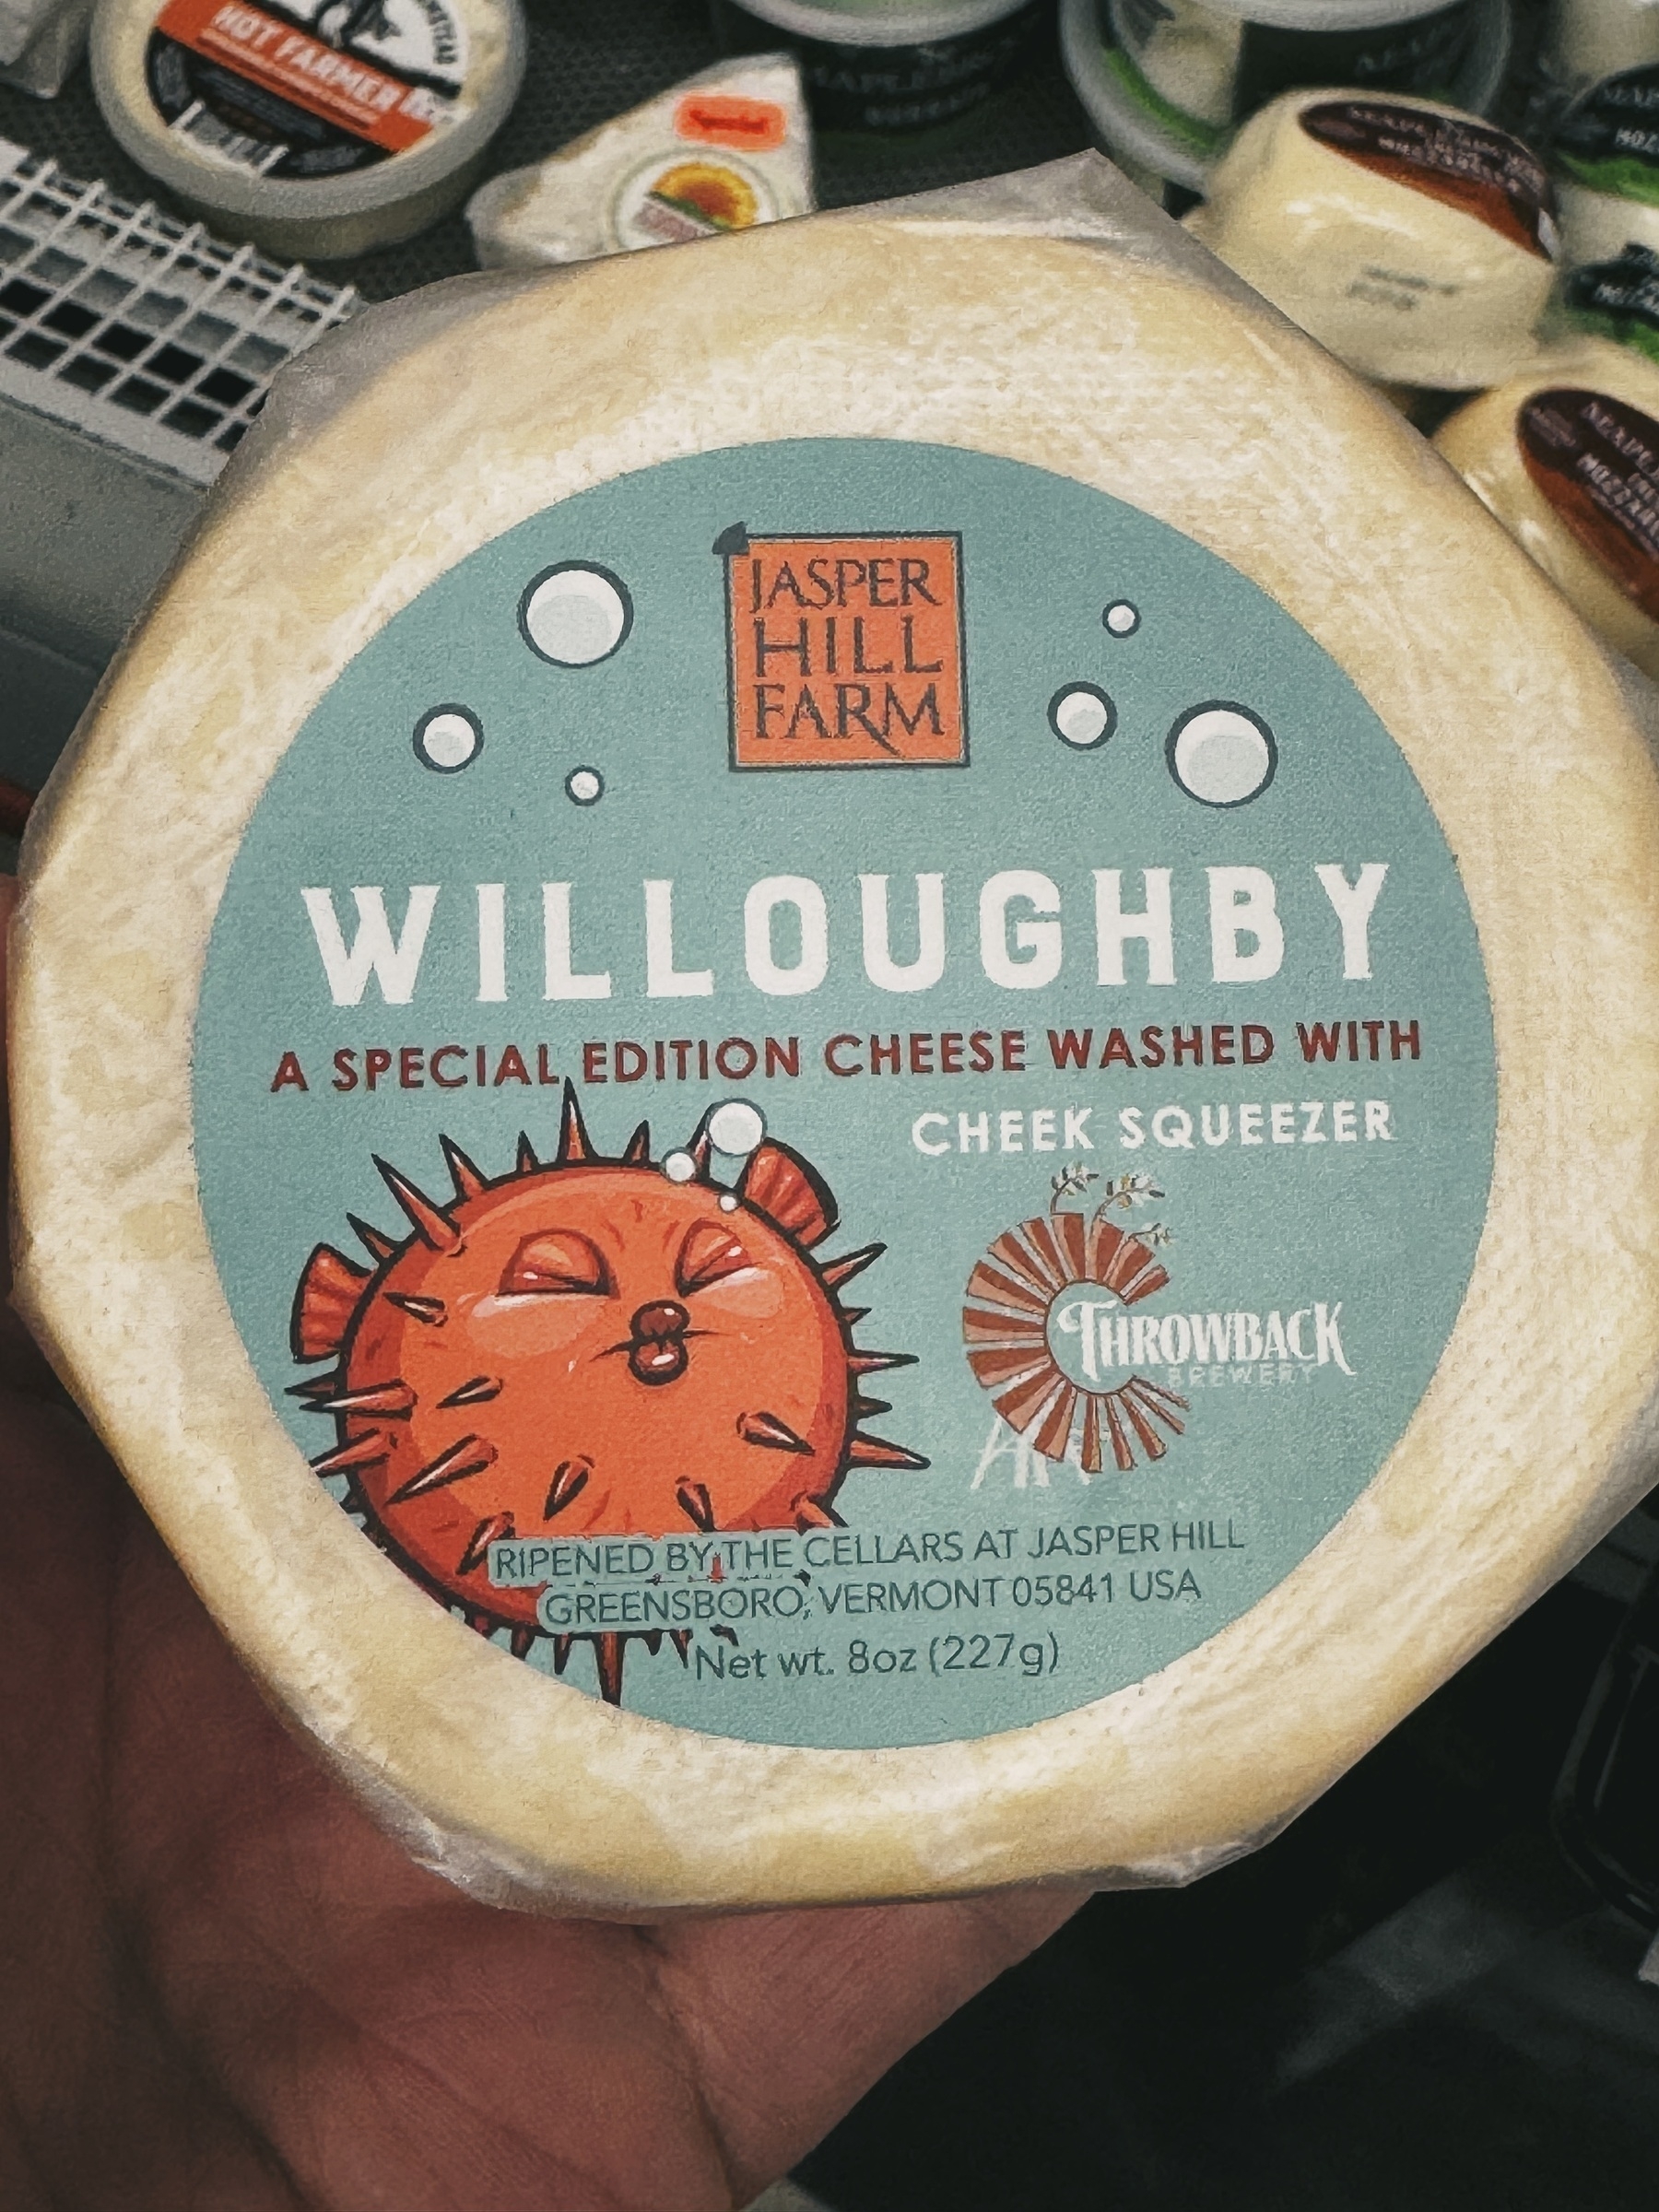 circular package of cheese with teal label and an orange blowfish mascot